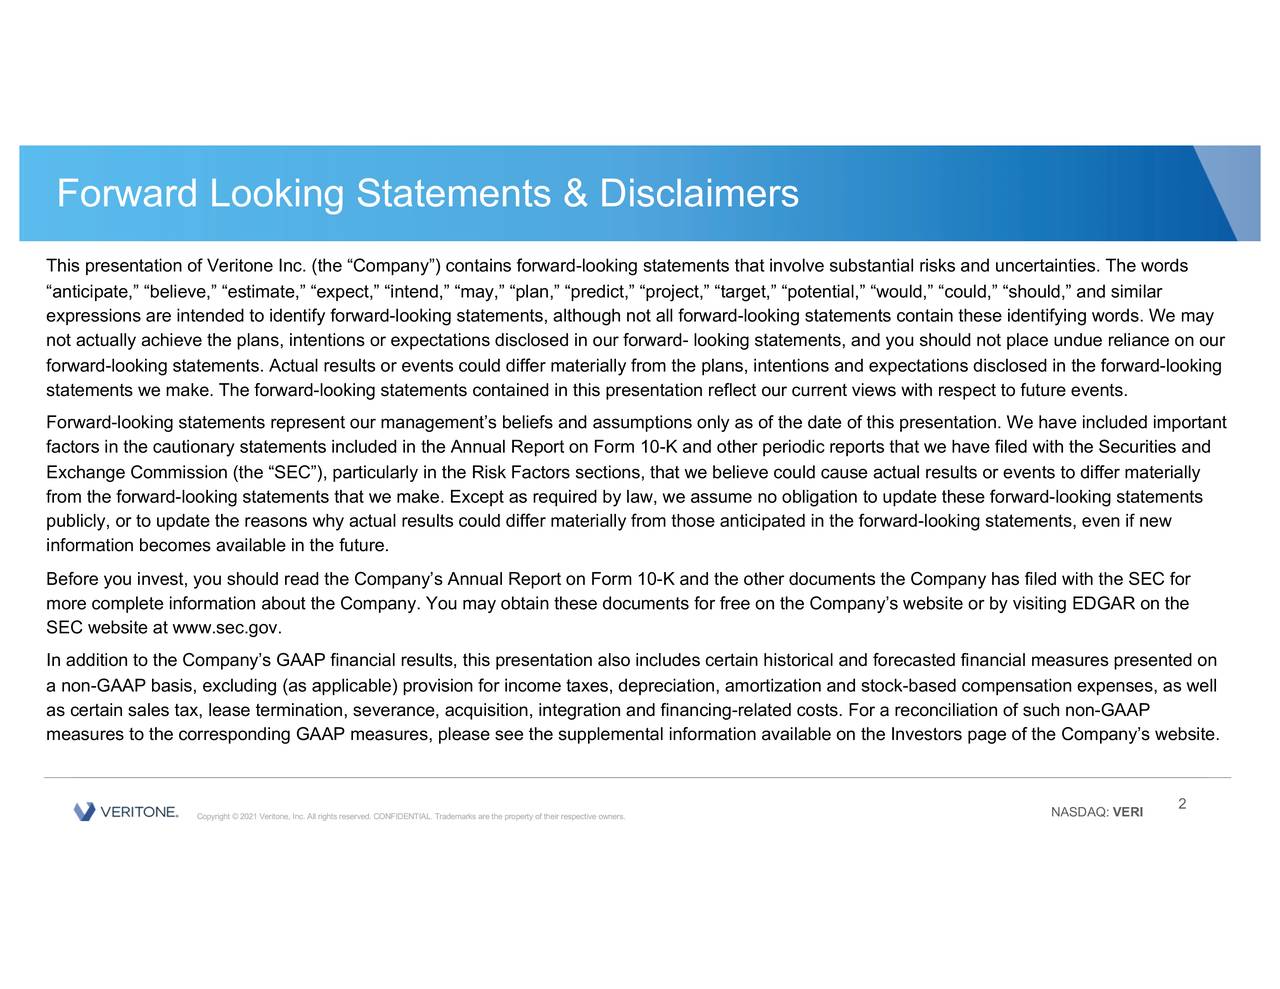 Forward Looking Statements & Disclaimers